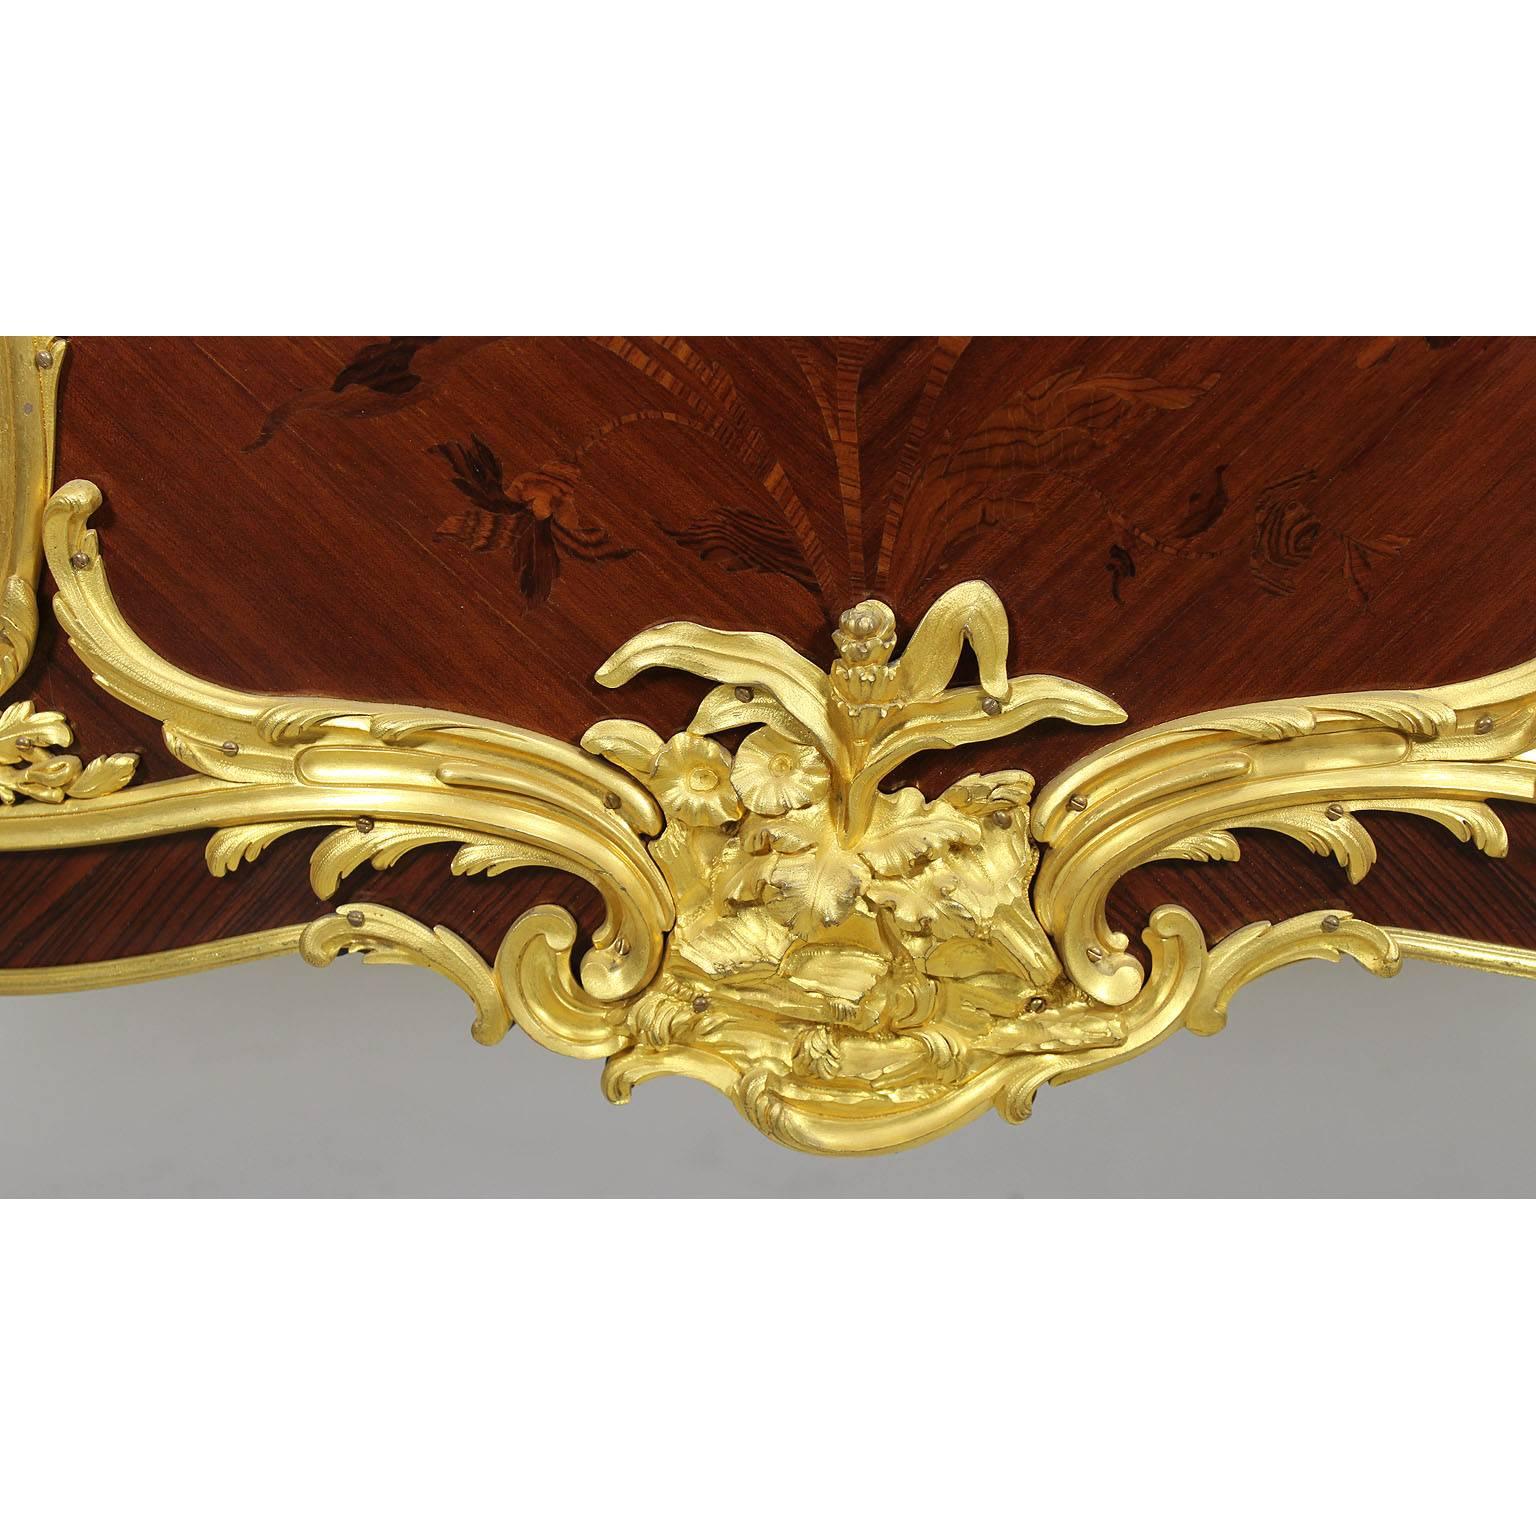 Fine Pair of 19th Century Louis XV Style Gilt Bronze-Mounted Commodes For Sale 2